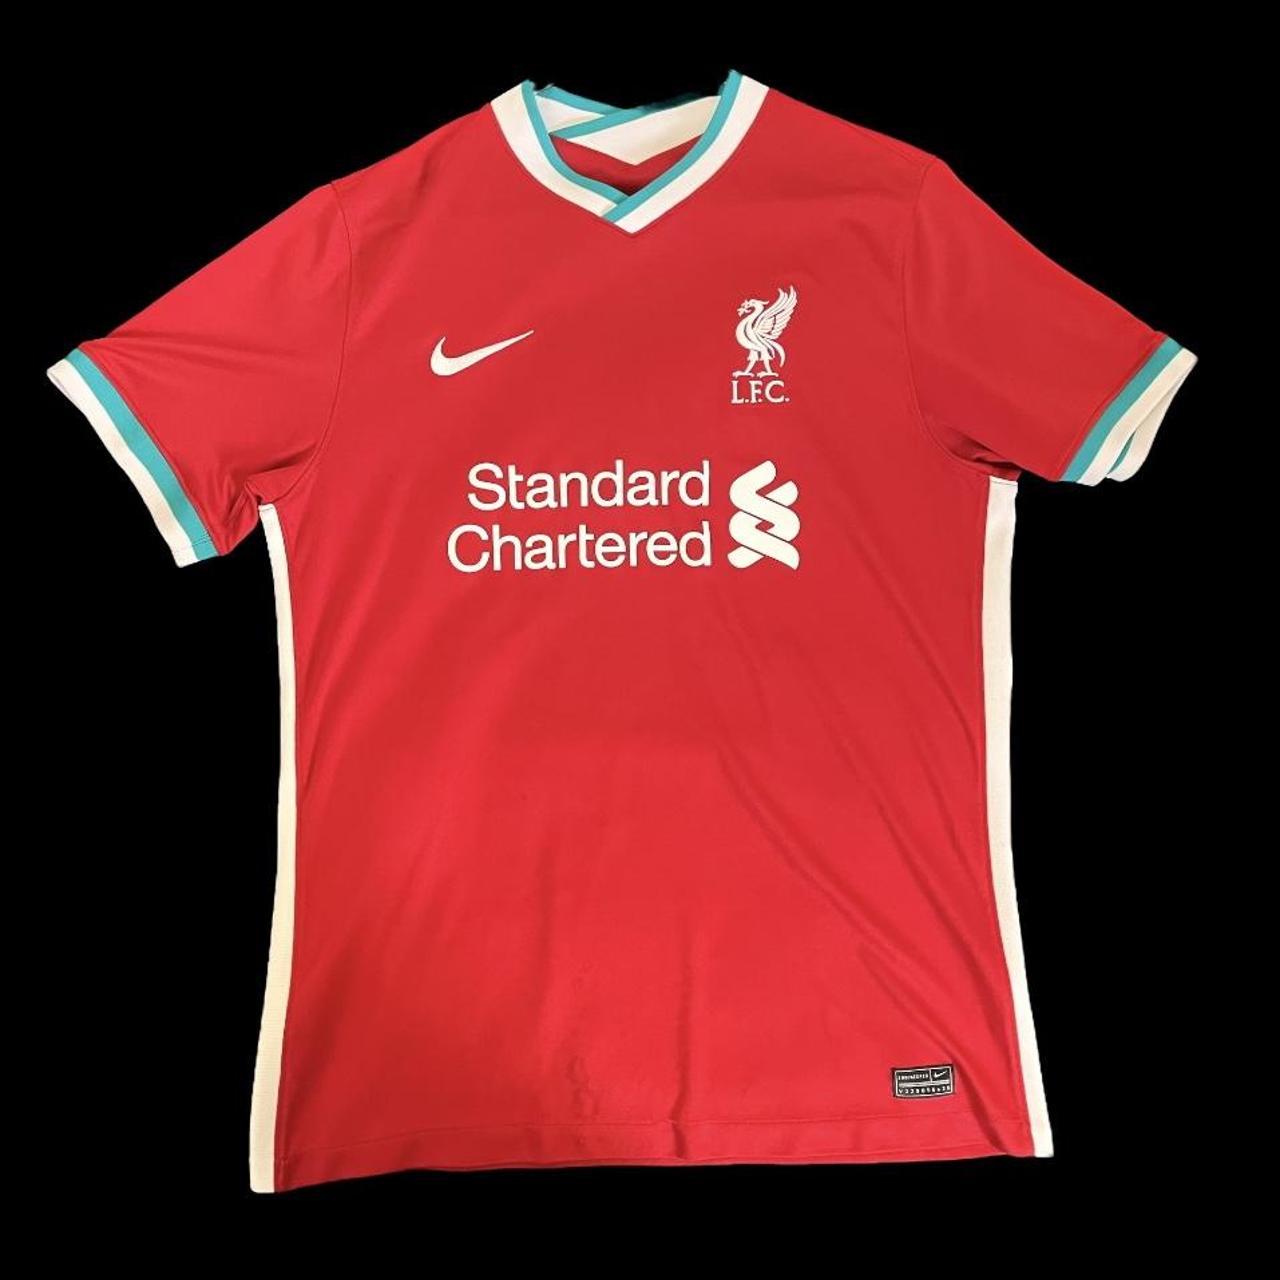 Product Image 1 - Liverpool 2020 home kit
No name

Size